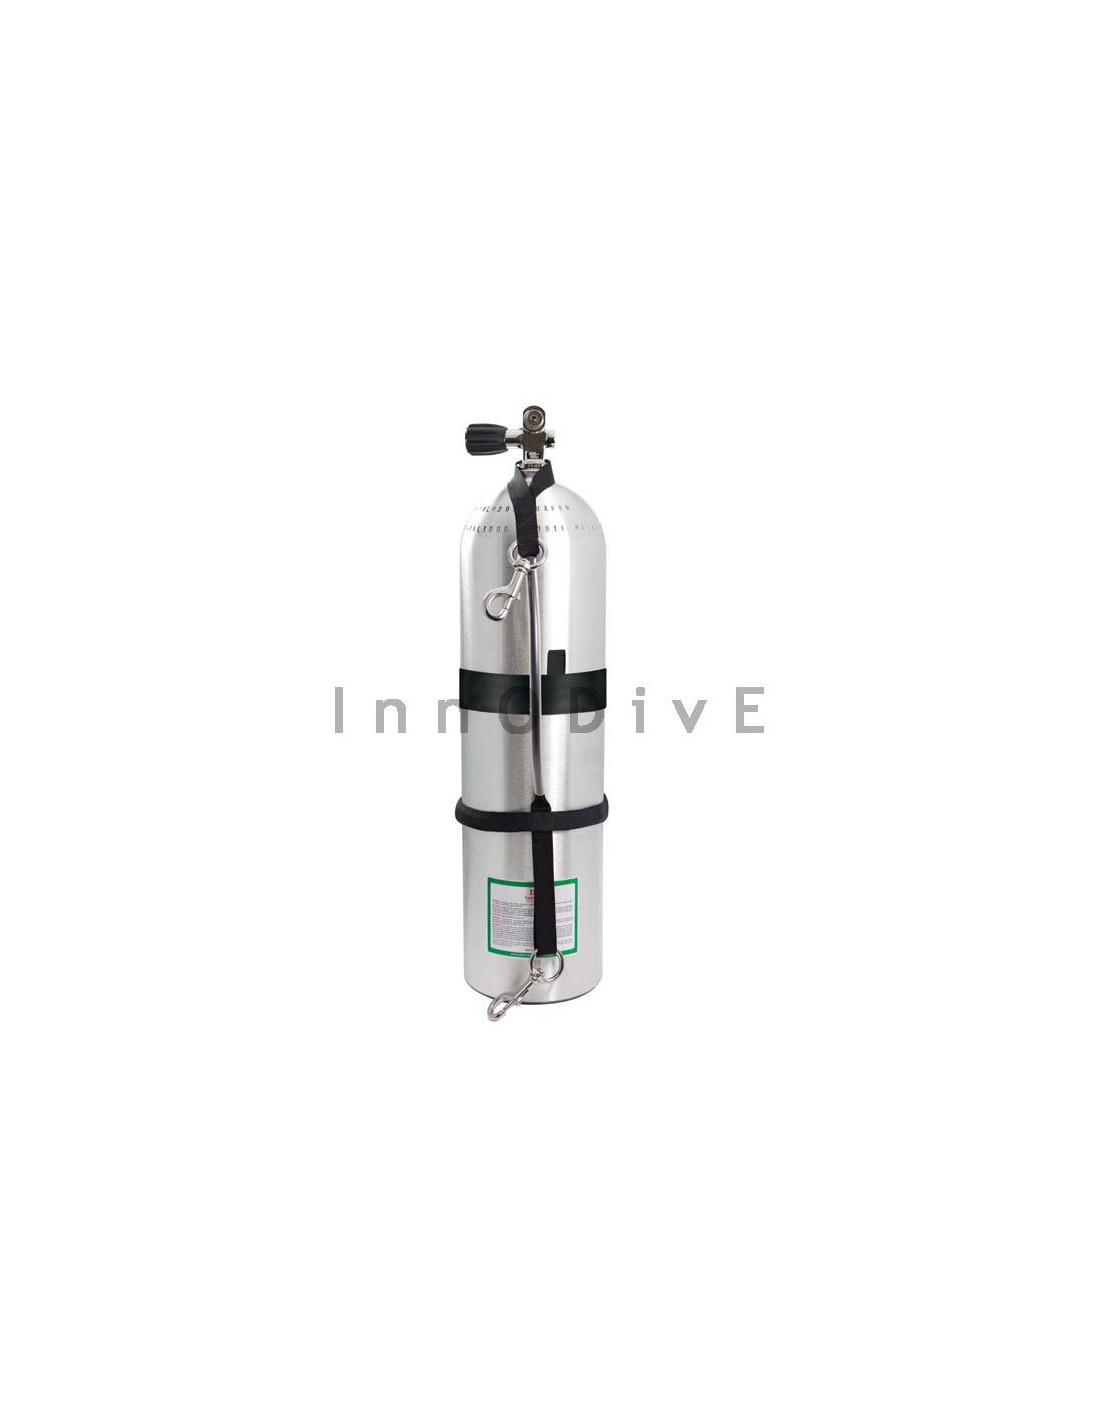 TECLINE SS tank band for 7L tank